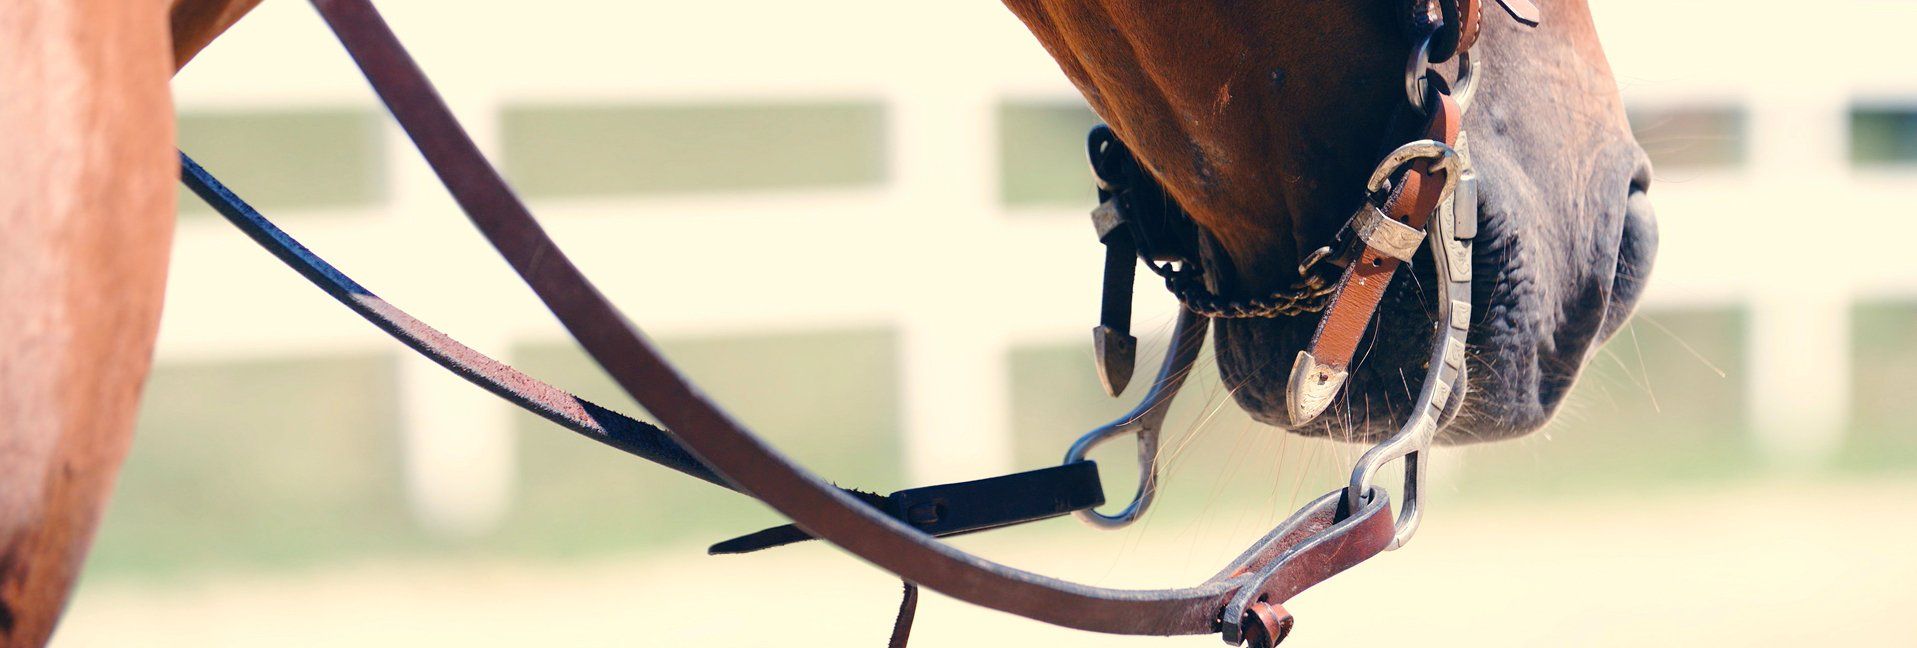 When it comes to halters, is there a right and wrong?